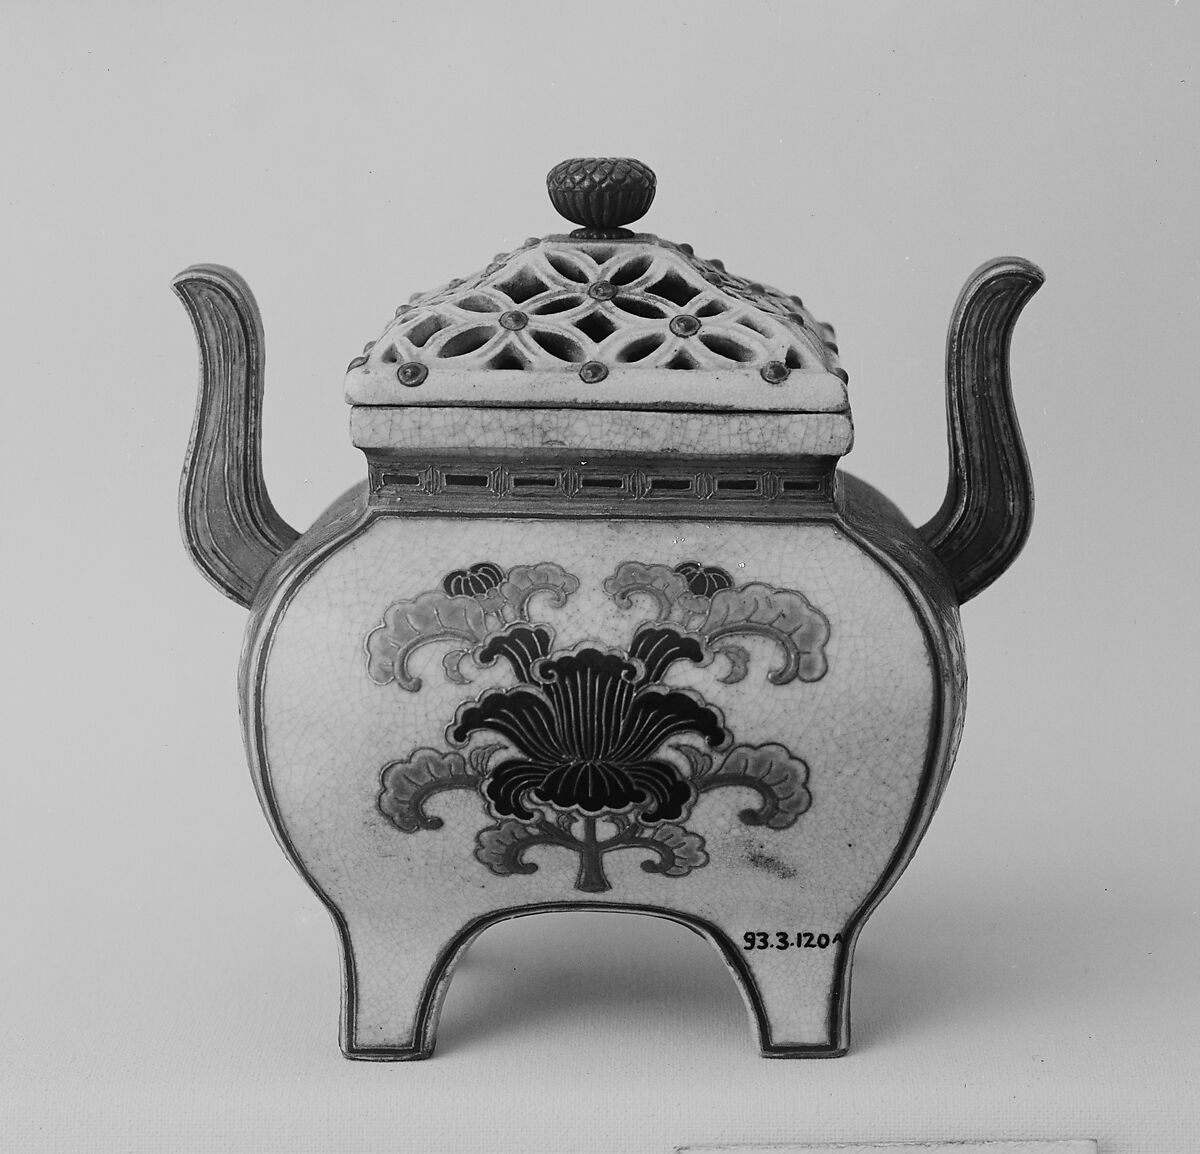 Incense Burner with Openwork Lid, Clay covered with a finely crackled glaze and colored and gold enamels (Satsuma ware), Japan 